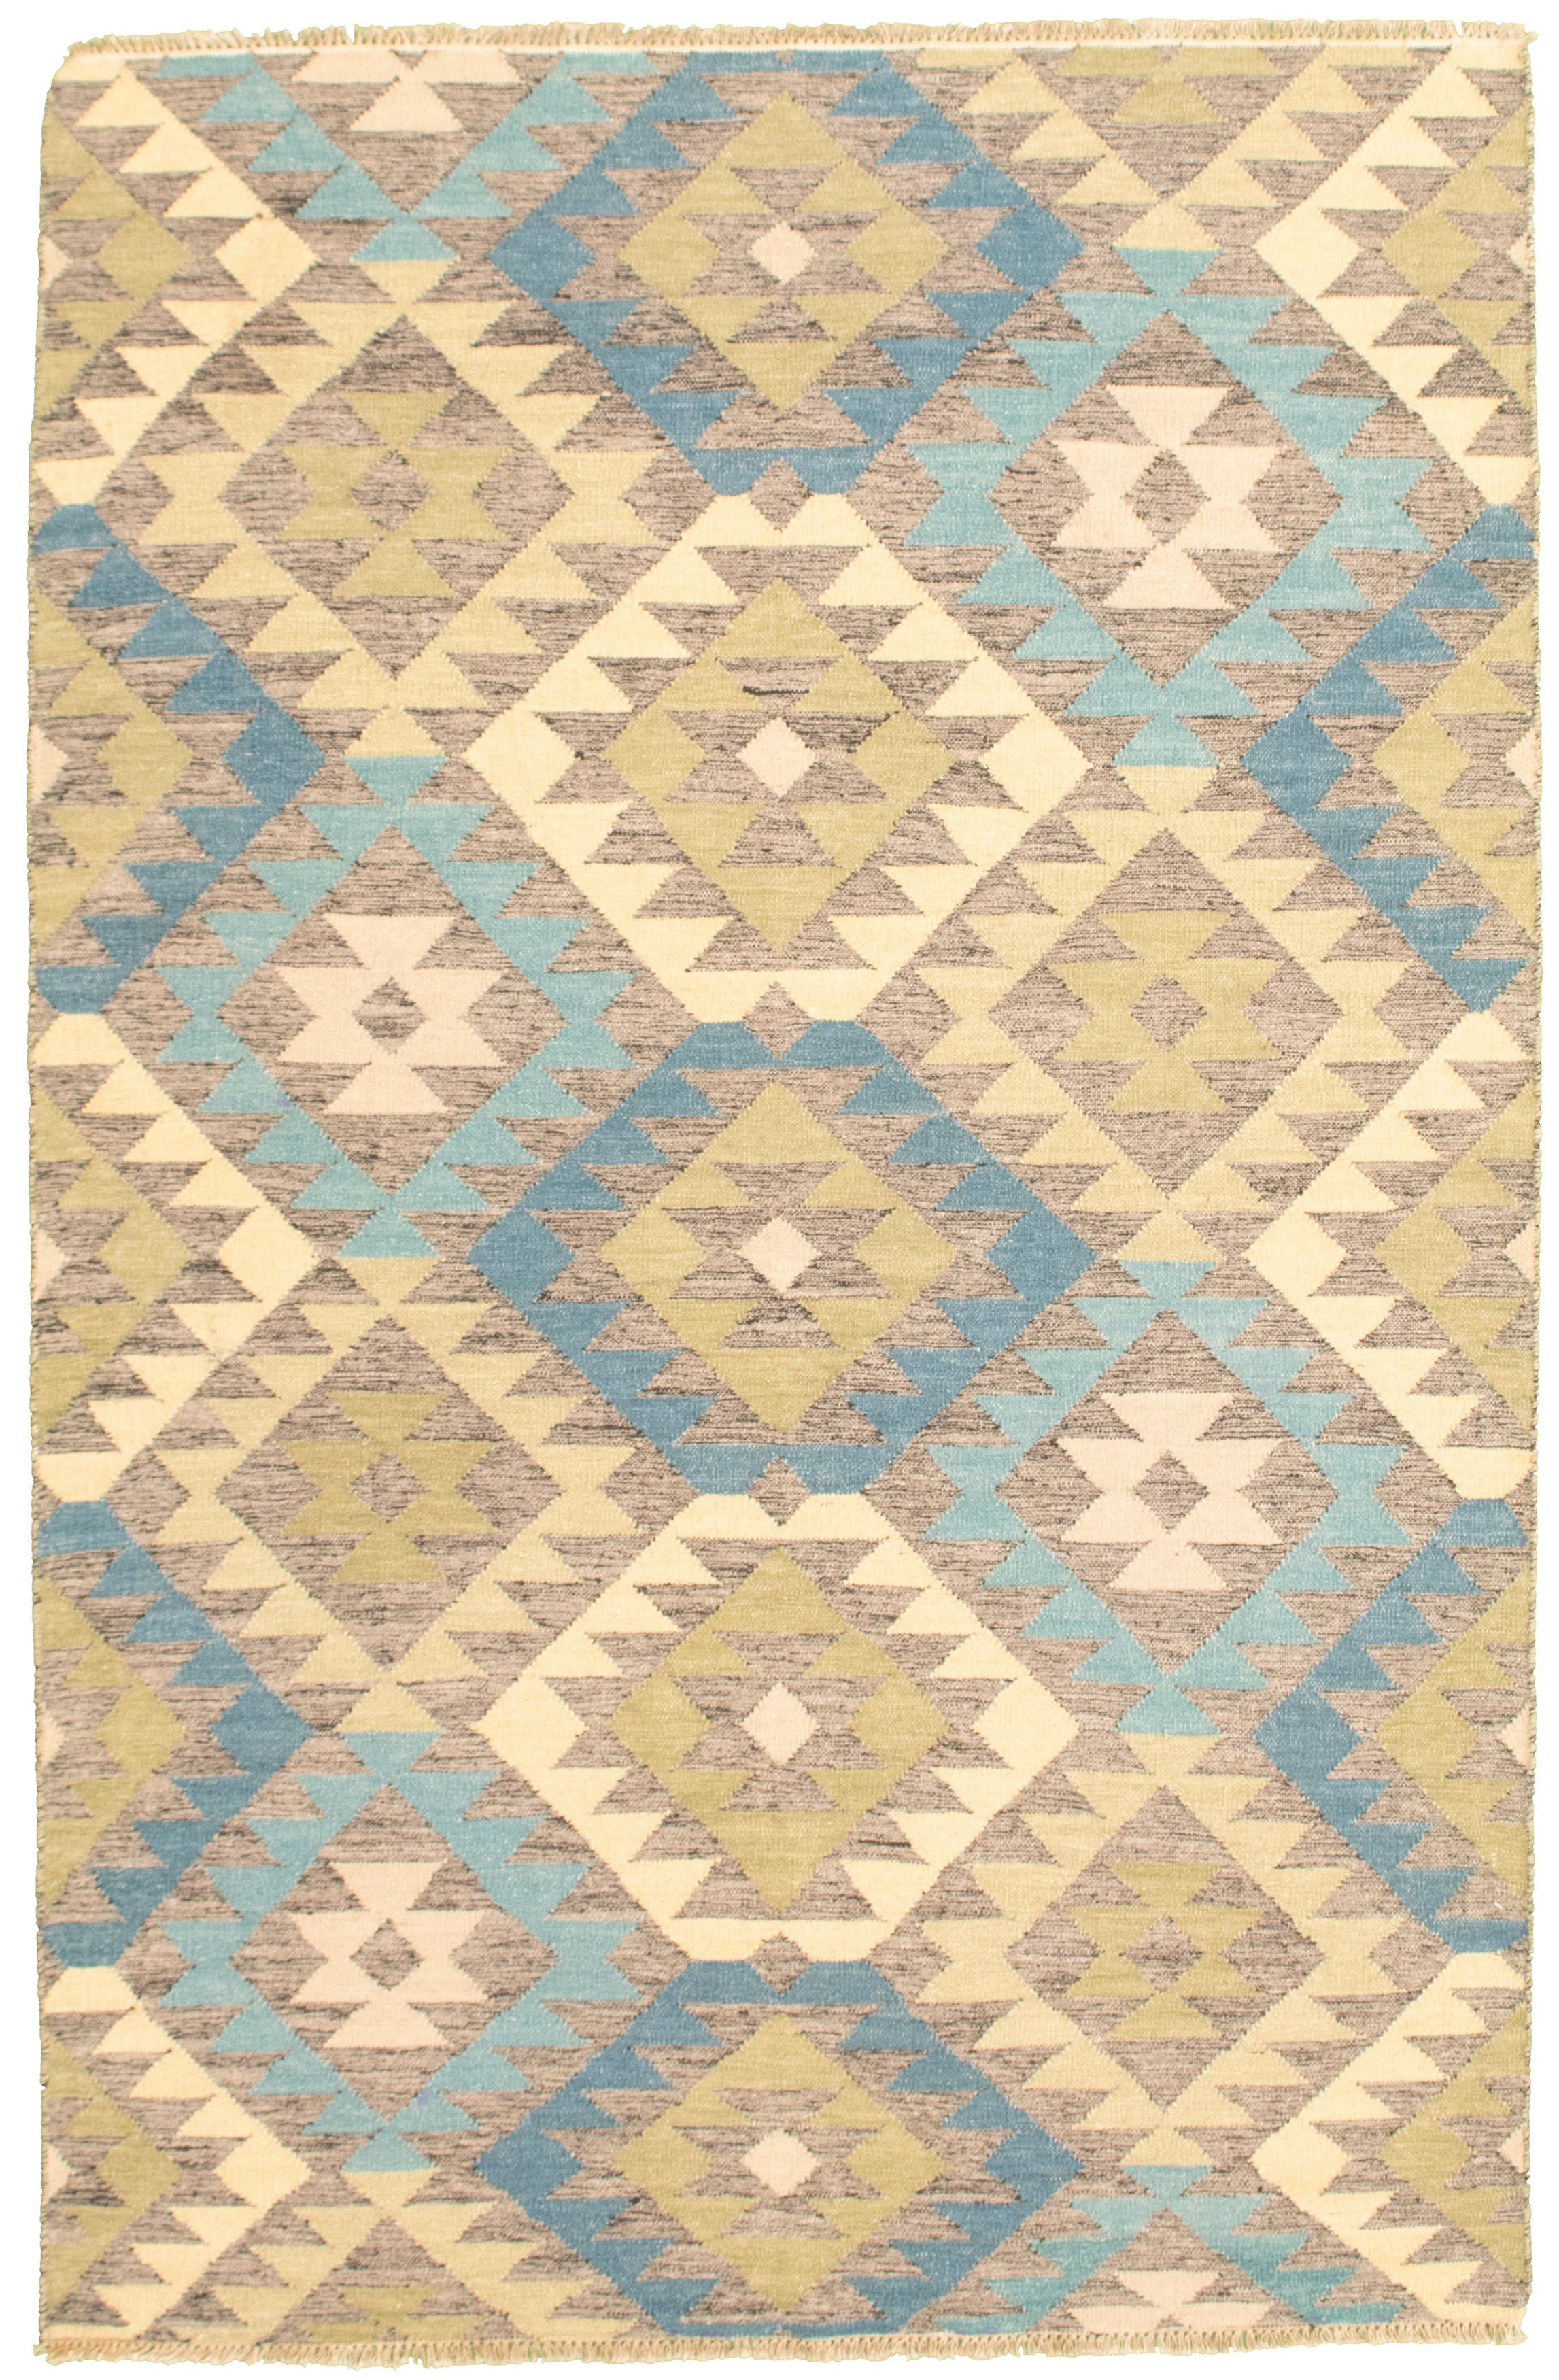 Hand woven Bold and Colorful  Grey, Turquoise Wool Kilim 5'2" x 8'0" Size: 5'2" x 8'0"  